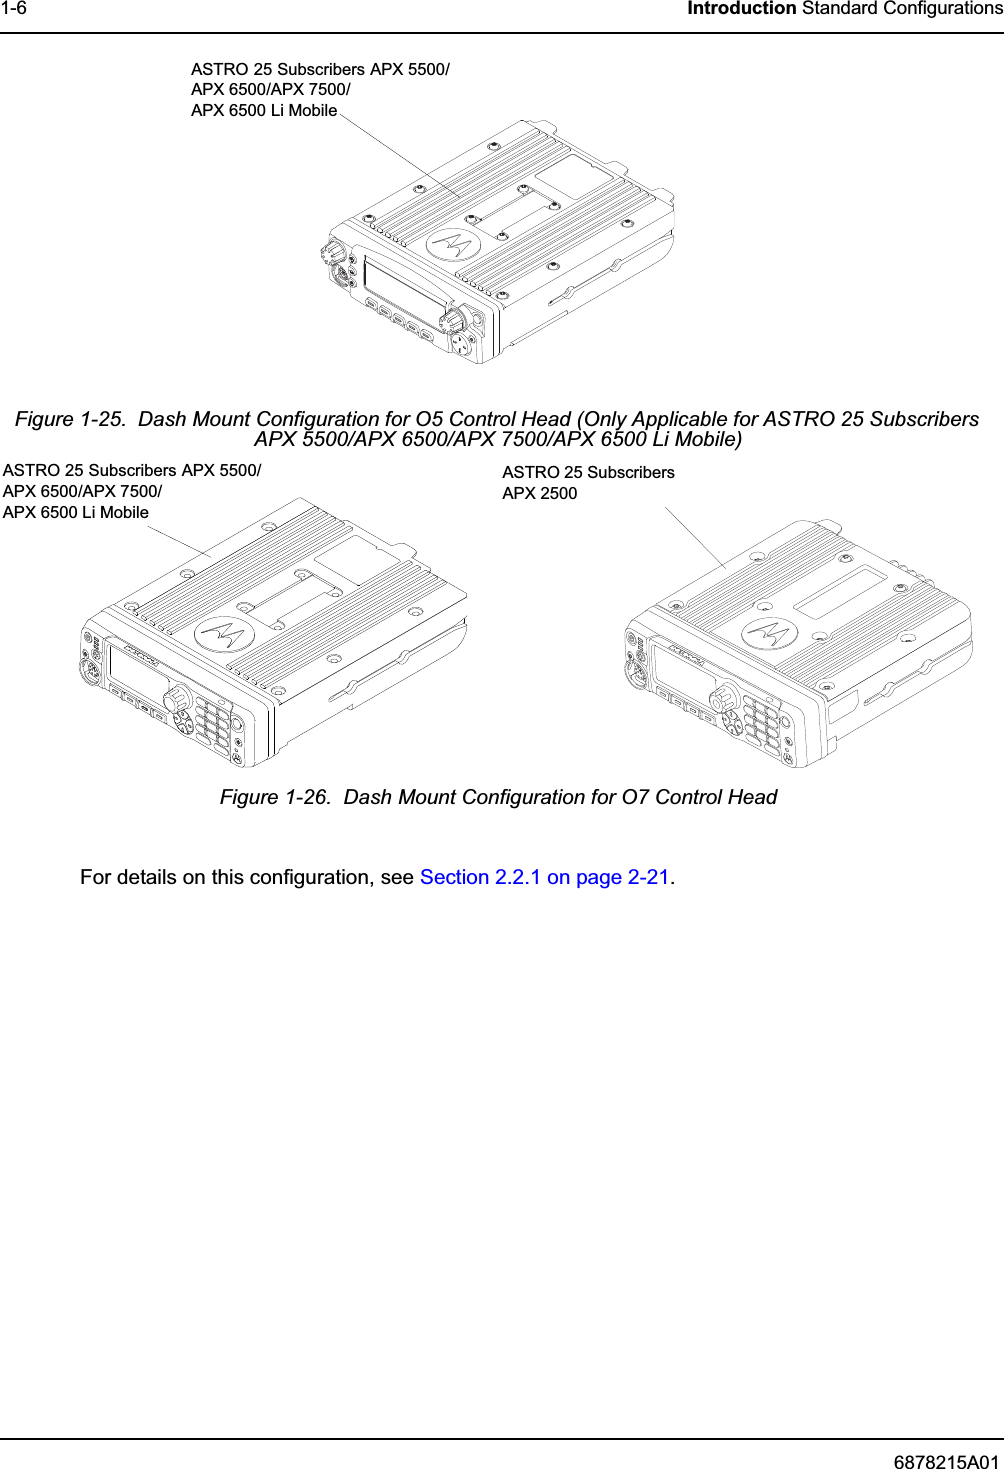 6878215A011-6 Introduction Standard ConfigurationsFor details on this configuration, see Section 2.2.1 on page 2-21.Figure 1-25.  Dash Mount Configuration for O5 Control Head (Only Applicable for ASTRO 25 Subscribers APX 5500/APX 6500/APX 7500/APX 6500 Li Mobile)Figure 1-26.  Dash Mount Configuration for O7 Control HeadASTRO 25 Subscribers APX 5500/APX 6500/APX 7500/APX 6500 Li MobileASTRO 25 Subscribers APX 2500ASTRO 25 Subscribers APX 5500/APX 6500/APX 7500/APX 6500 Li Mobile